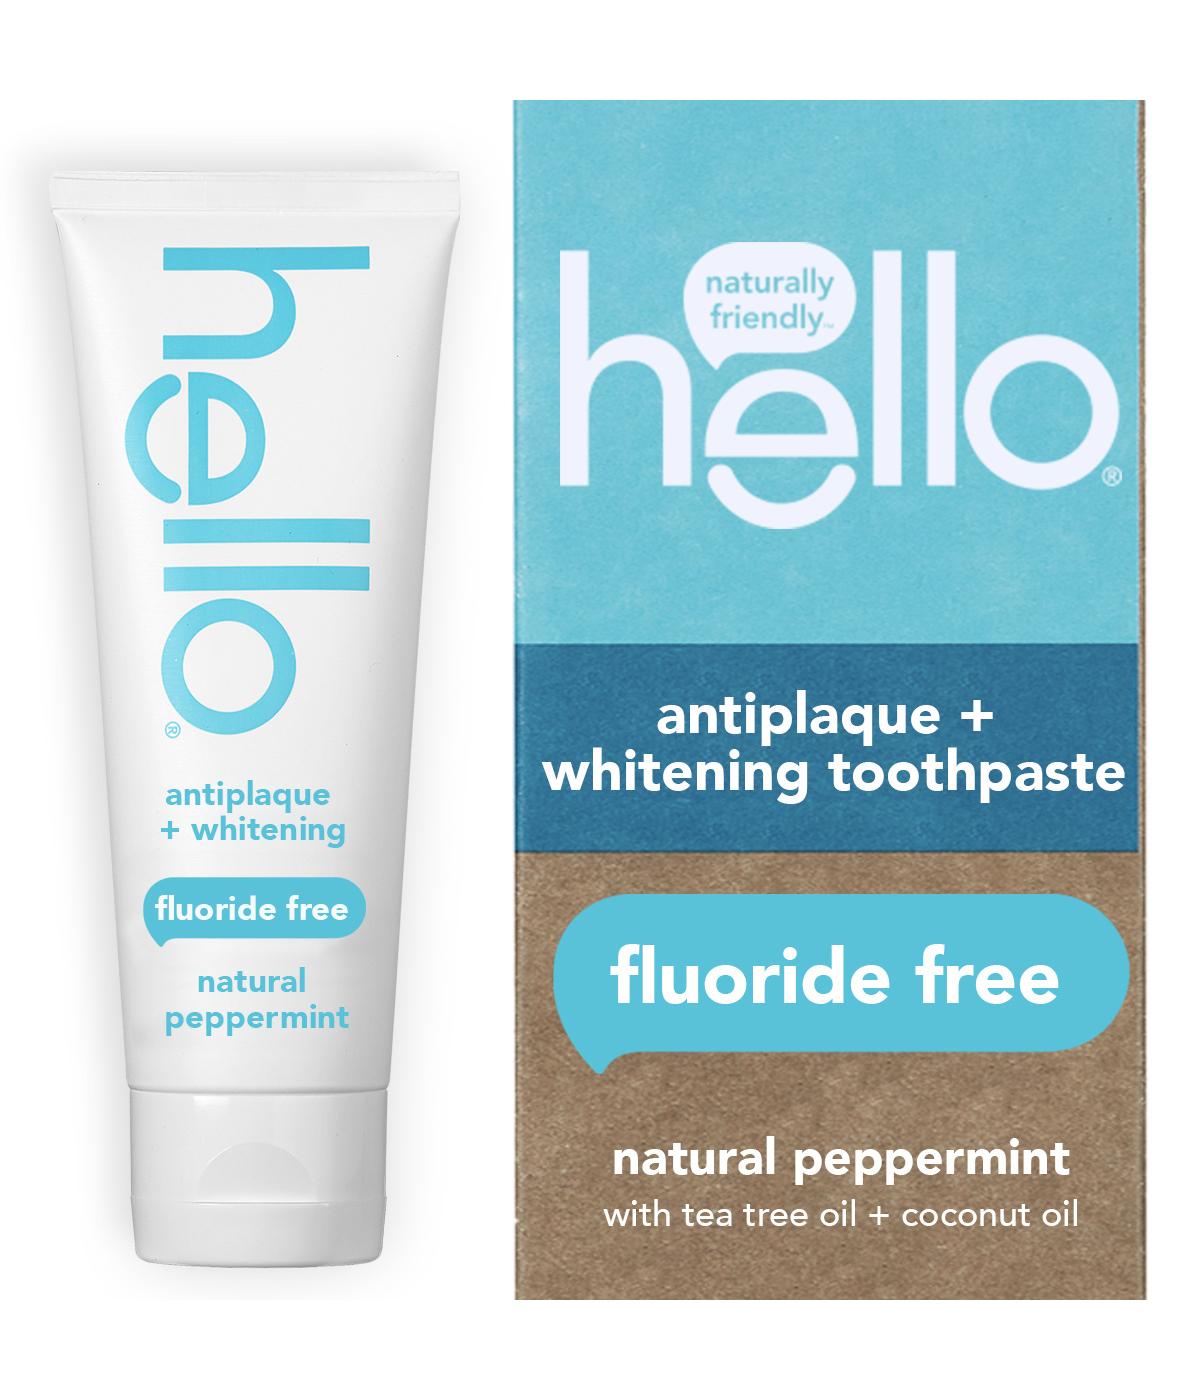 hello Antiplaque + Whitening Fluoride Free Toothpaste - Natural Peppermint; image 6 of 10